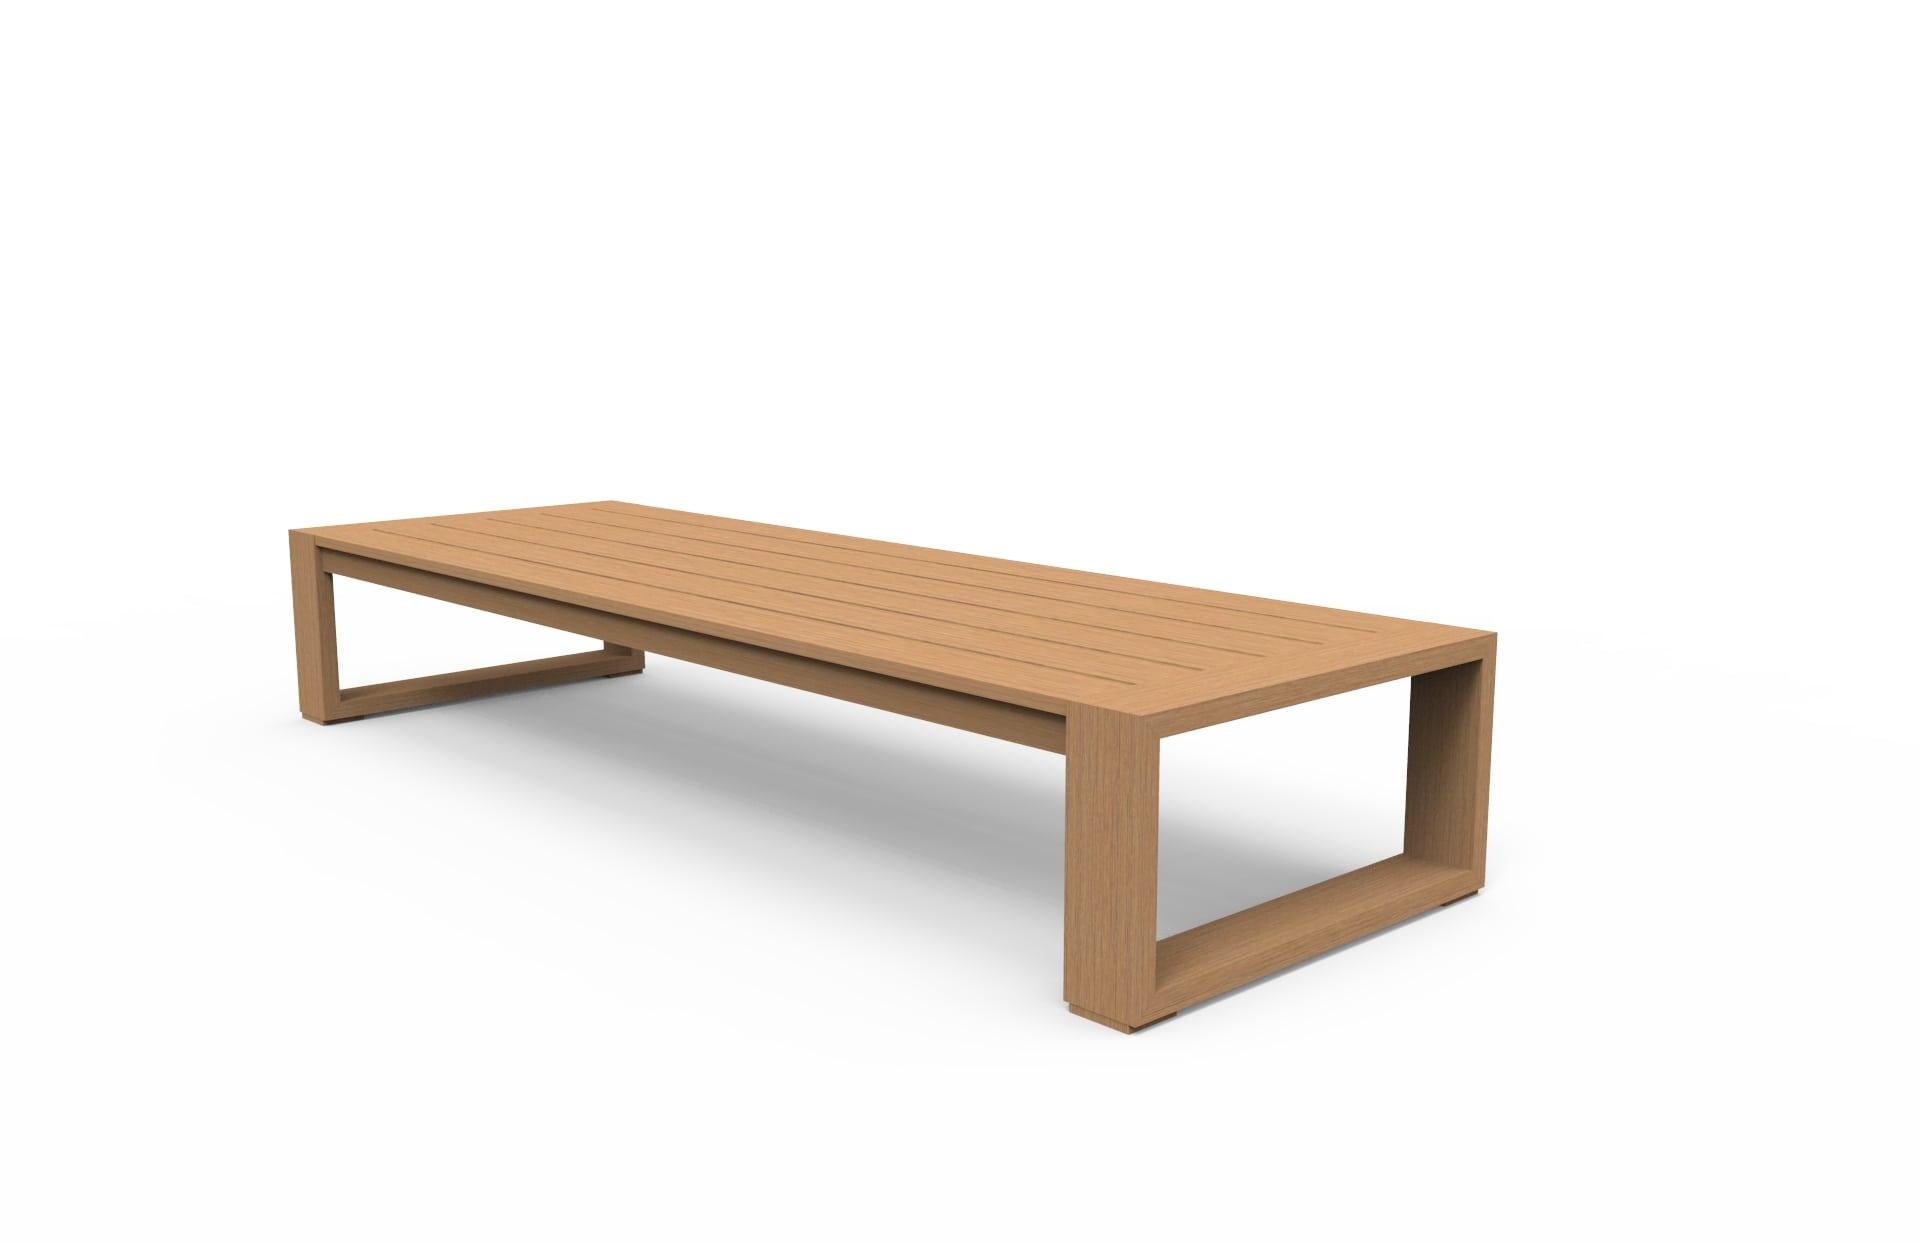 With it’s simple design, the Brixton coffee table’s wide base and solid construction makes this a remarkable design for years to come. All Cavan furniture is made by hand, upon order, with Grade-A teak wood. Dimensions & finishes are customizable